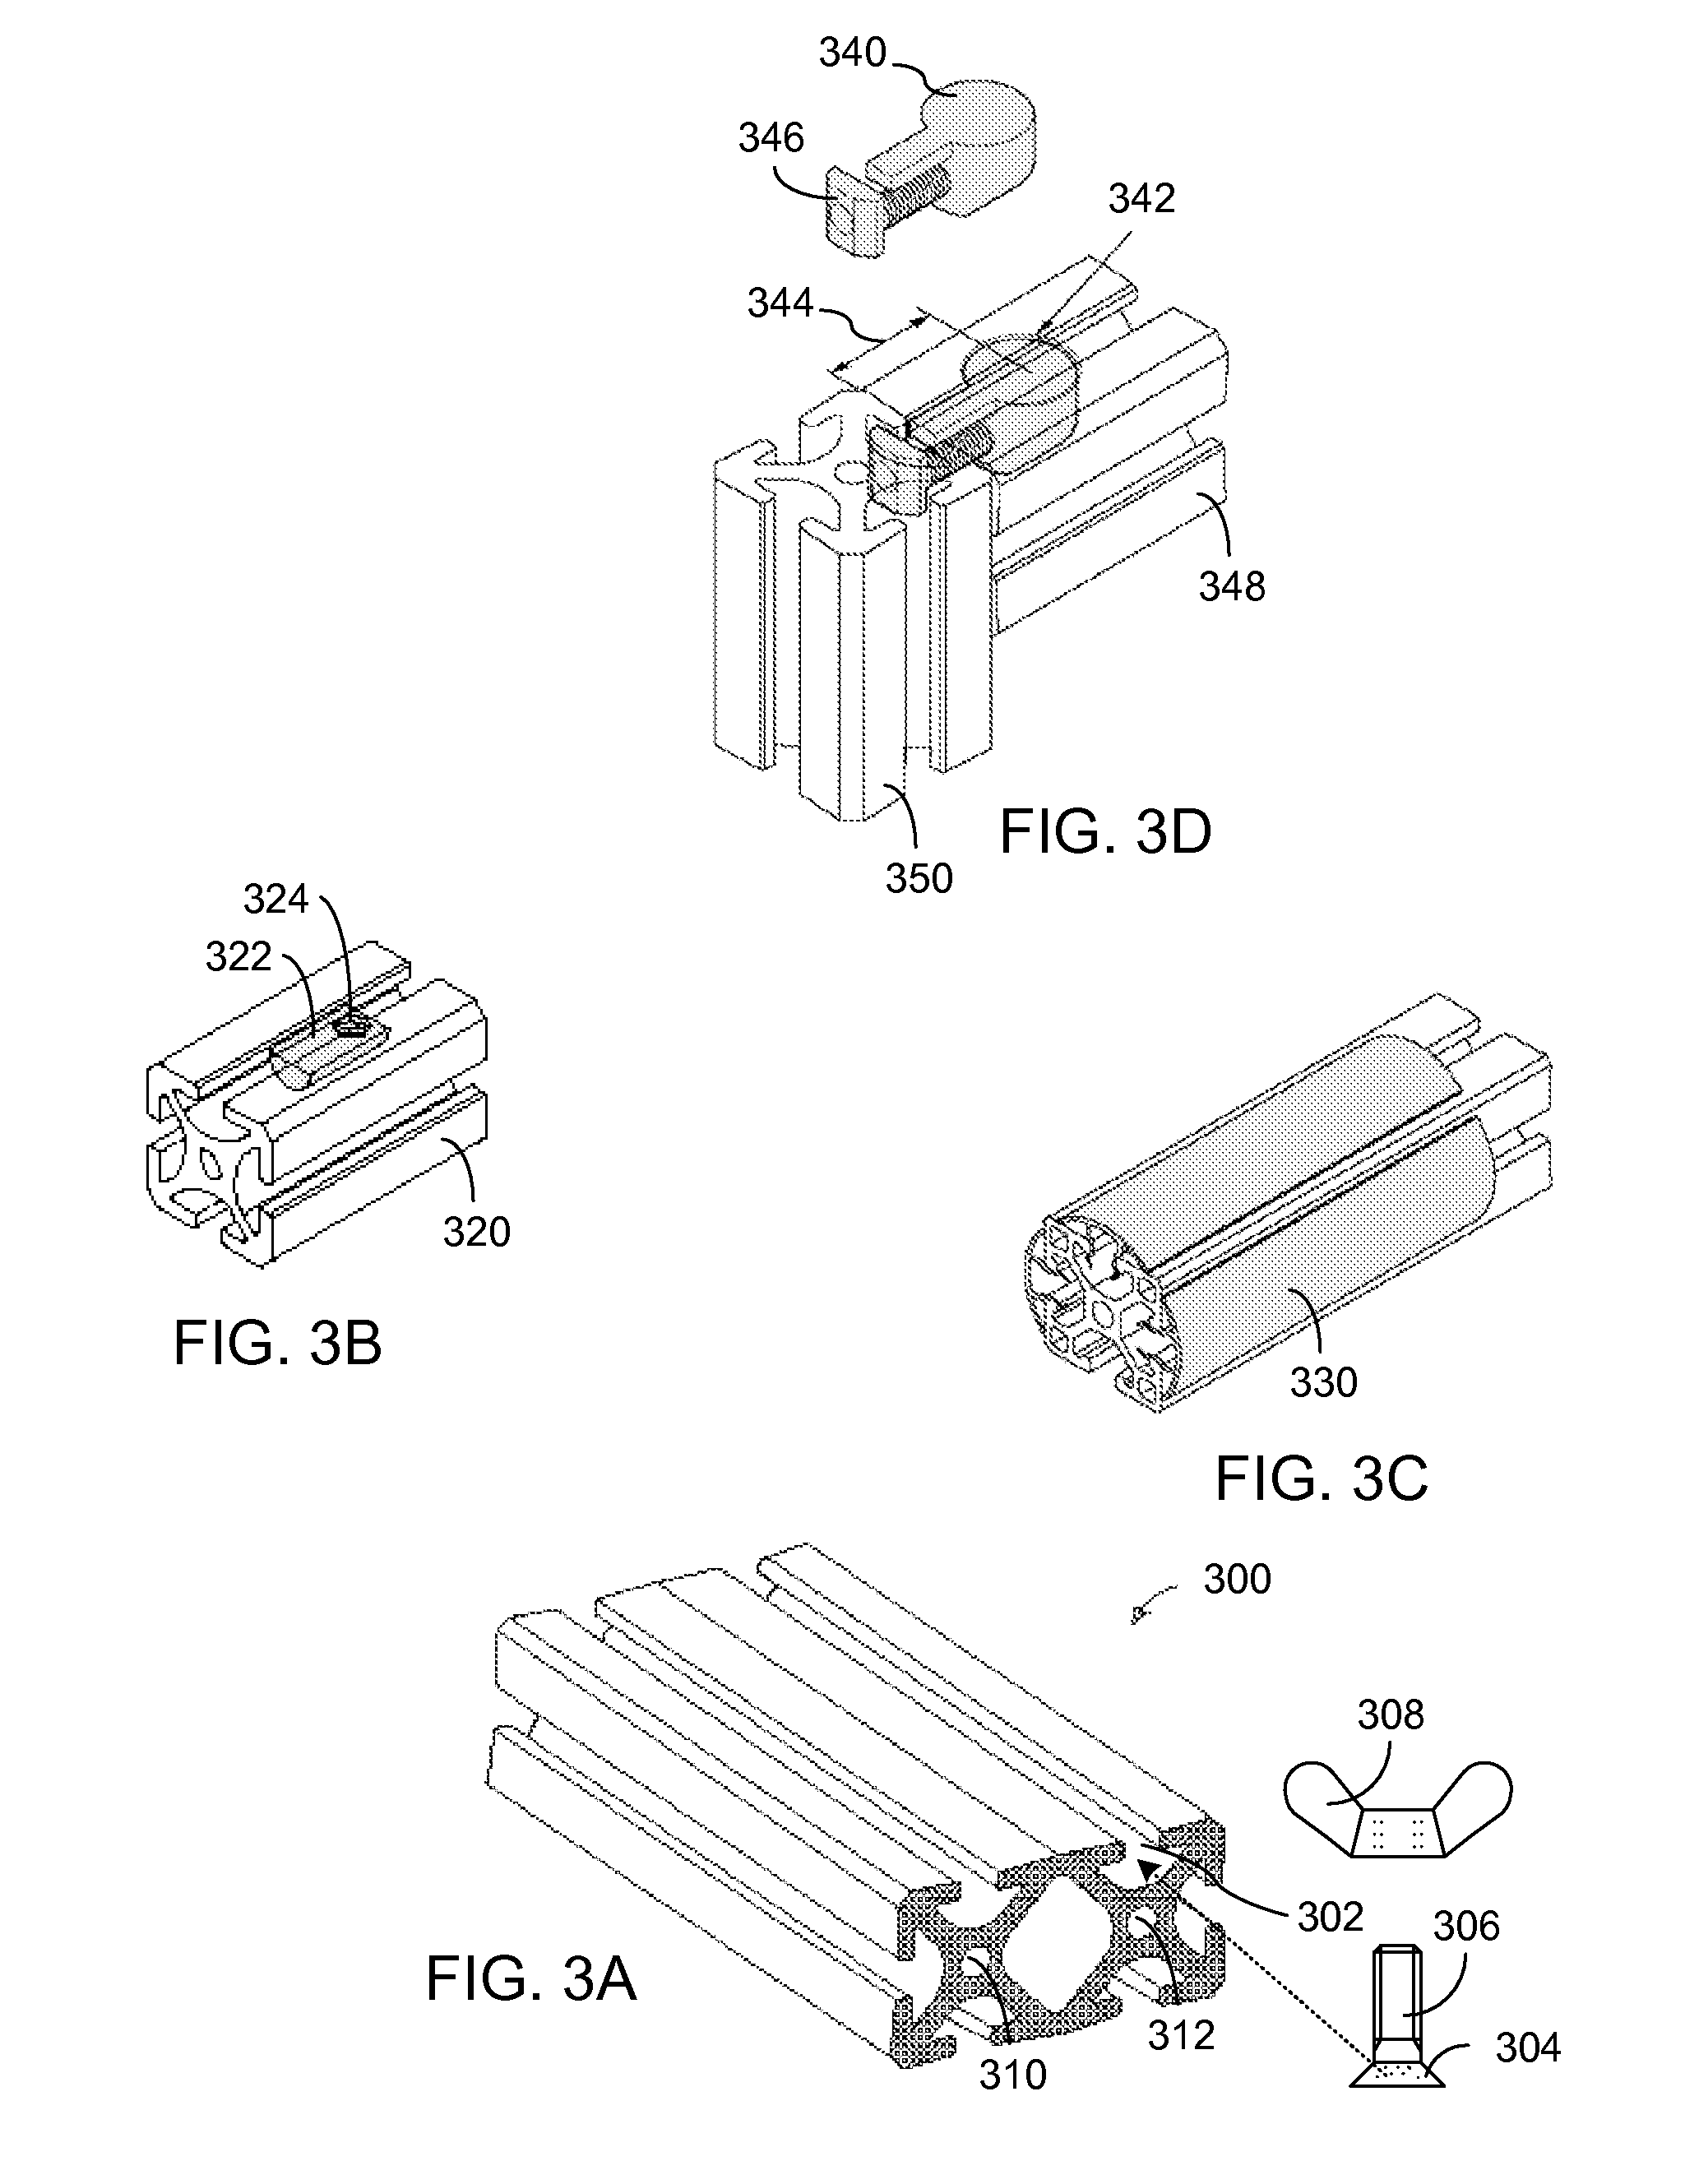 Method and apparatus for a mobile training device for simultaneous use by multiple users